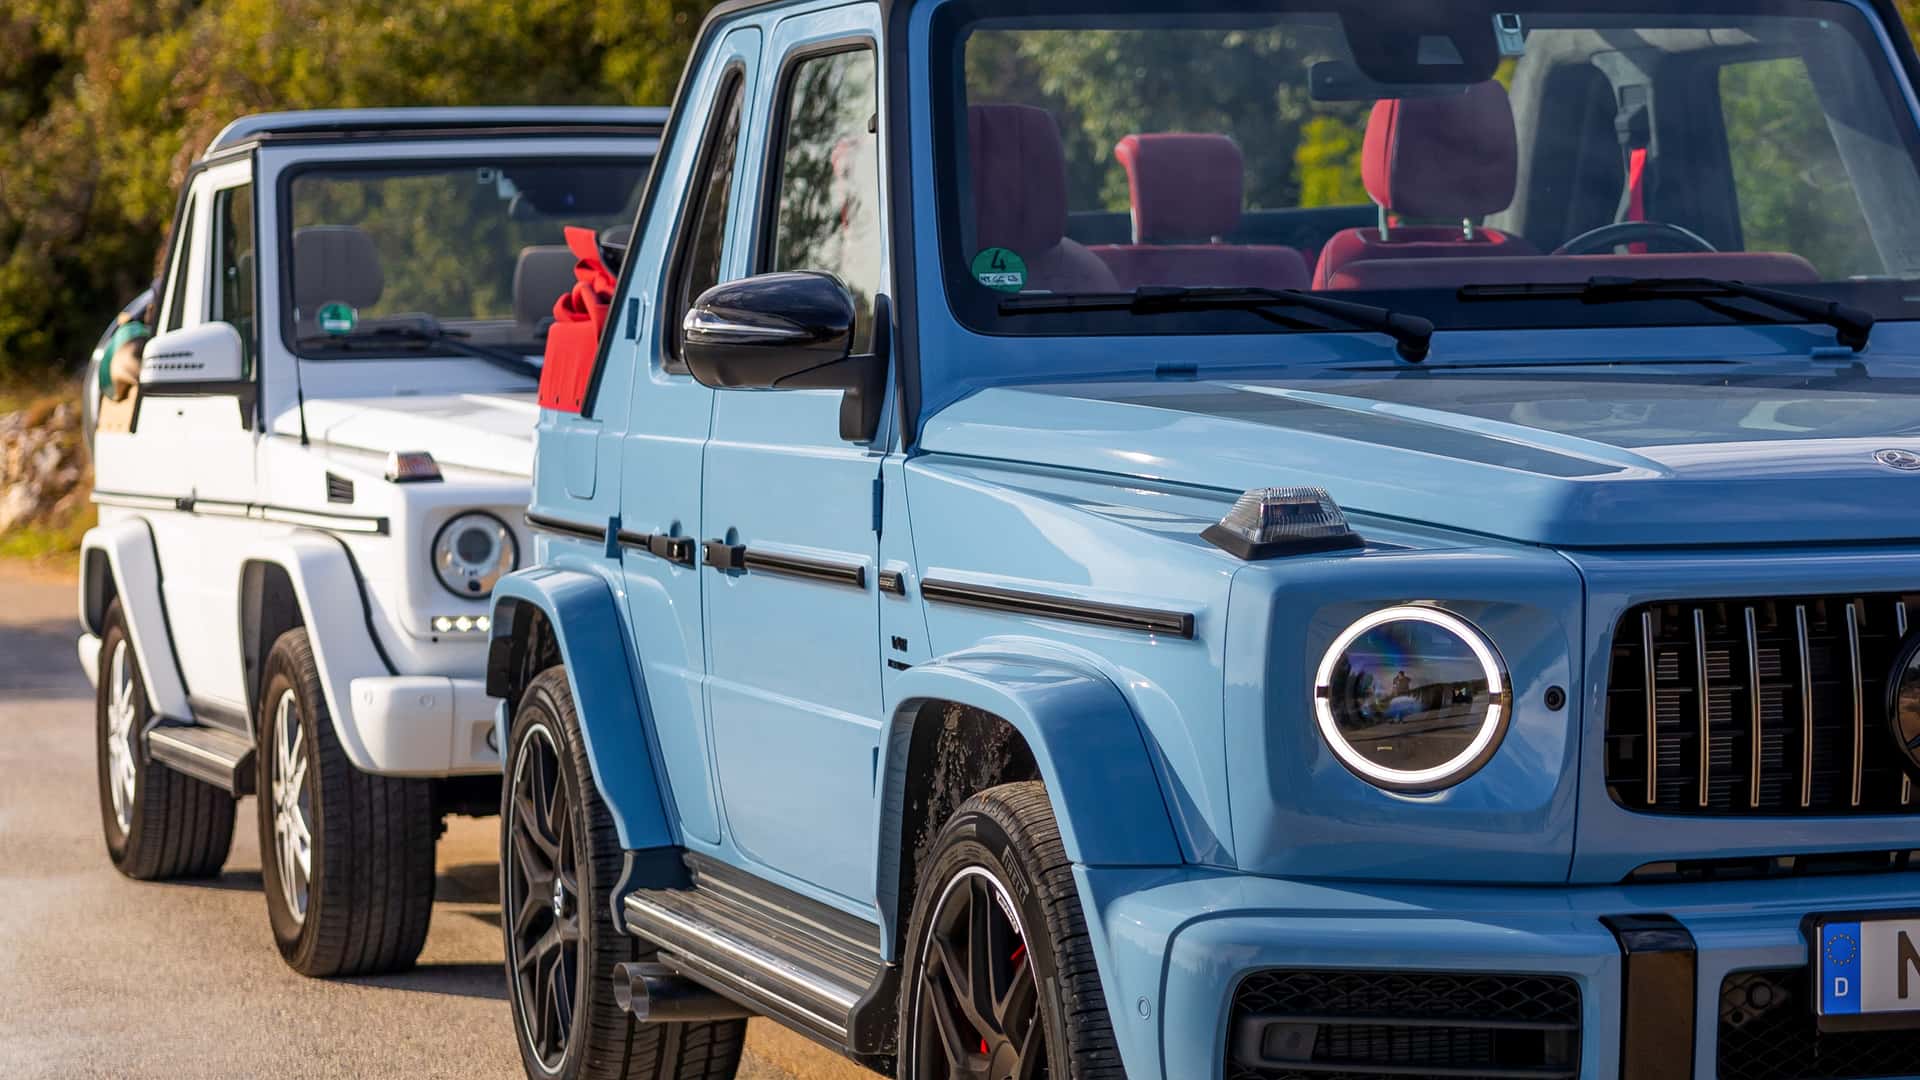 the-13-million-mercedes-benz-g-class-is-convertible-and-has-suicide-doors_7.jpg